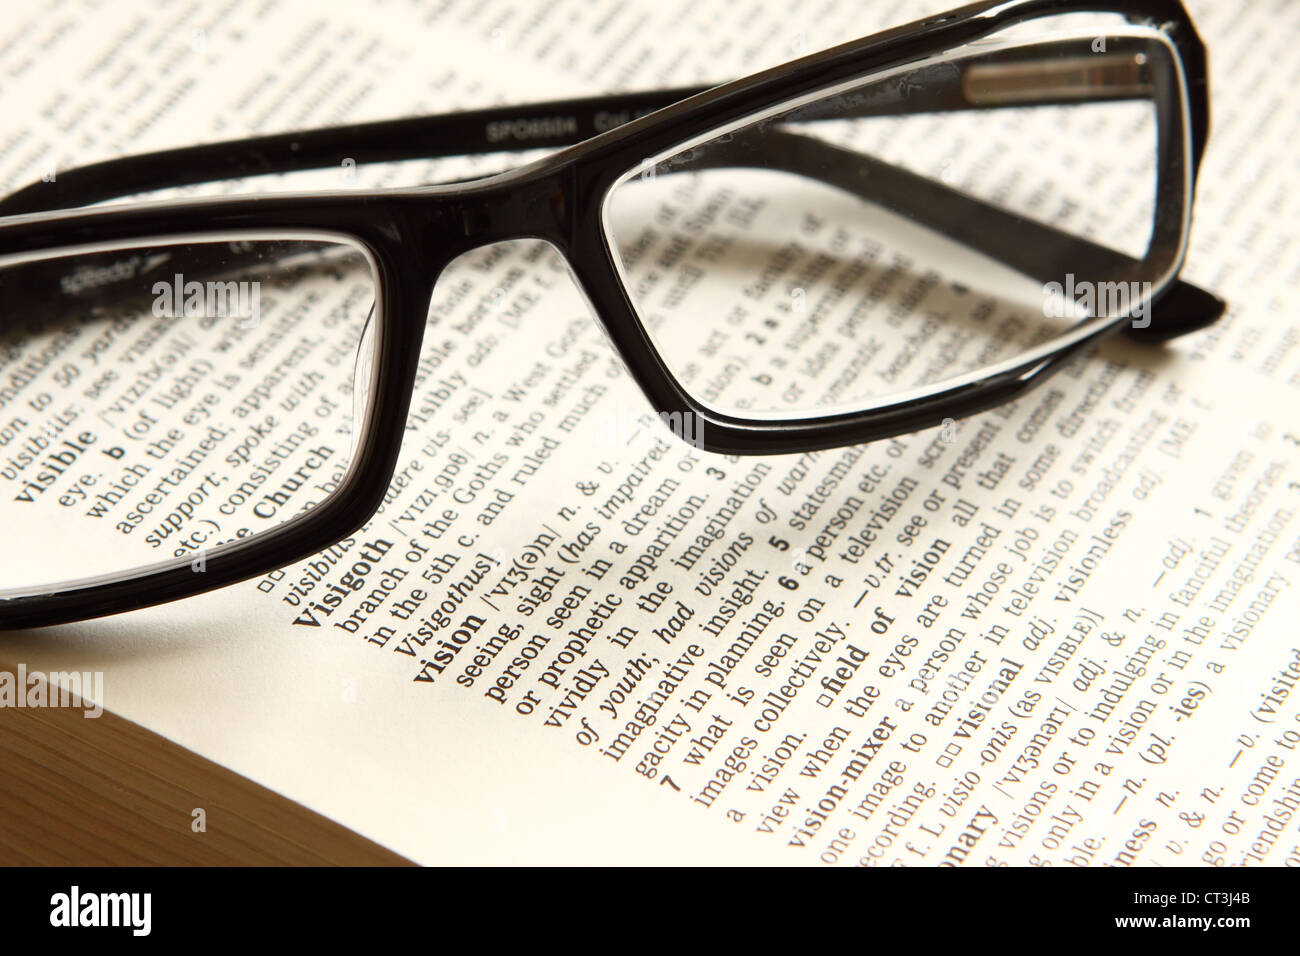 Glasses eyesight looking at the word vision Stock Photo